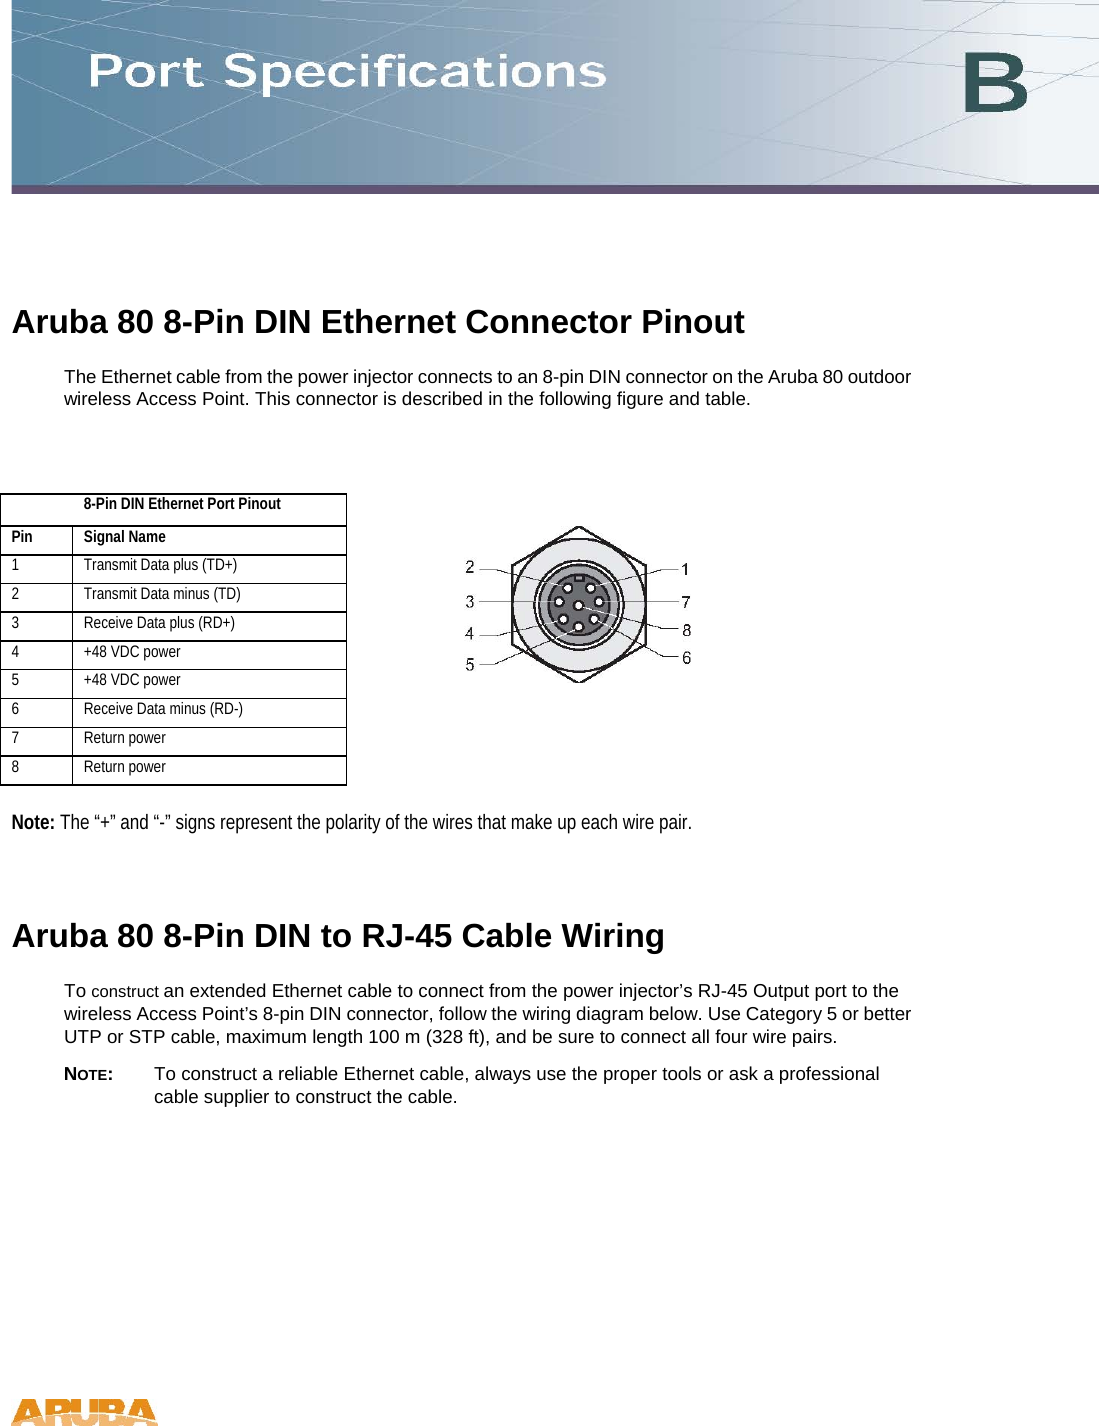 Aruba 80 8-Pin DIN Ethernet Connector Pinout  The Ethernet cable from the power injector connects to an 8-pin DIN connector on the Aruba 80 outdoor wireless Access Point. This connector is described in the following figure and table.   8-Pin DIN Ethernet Port Pinout   Pin  Signal Name  1   Transmit Data plus (TD+)  2   Transmit Data minus (TD)  3   Receive Data plus (RD+)  4   +48 VDC power  5   +48 VDC power  6   Receive Data minus (RD-)  7   Return power  8   Return power    Note: The “+” and “-” signs represent the polarity of the wires that make up each wire pair.  Aruba 80 8-Pin DIN to RJ-45 Cable Wiring  To construct an extended Ethernet cable to connect from the power injector’s RJ-45 Output port to the wireless Access Point’s 8-pin DIN connector, follow the wiring diagram below. Use Category 5 or better UTP or STP cable, maximum length 100 m (328 ft), and be sure to connect all four wire pairs.  NOTE:  To construct a reliable Ethernet cable, always use the proper tools or ask a professional cable supplier to construct the cable.   